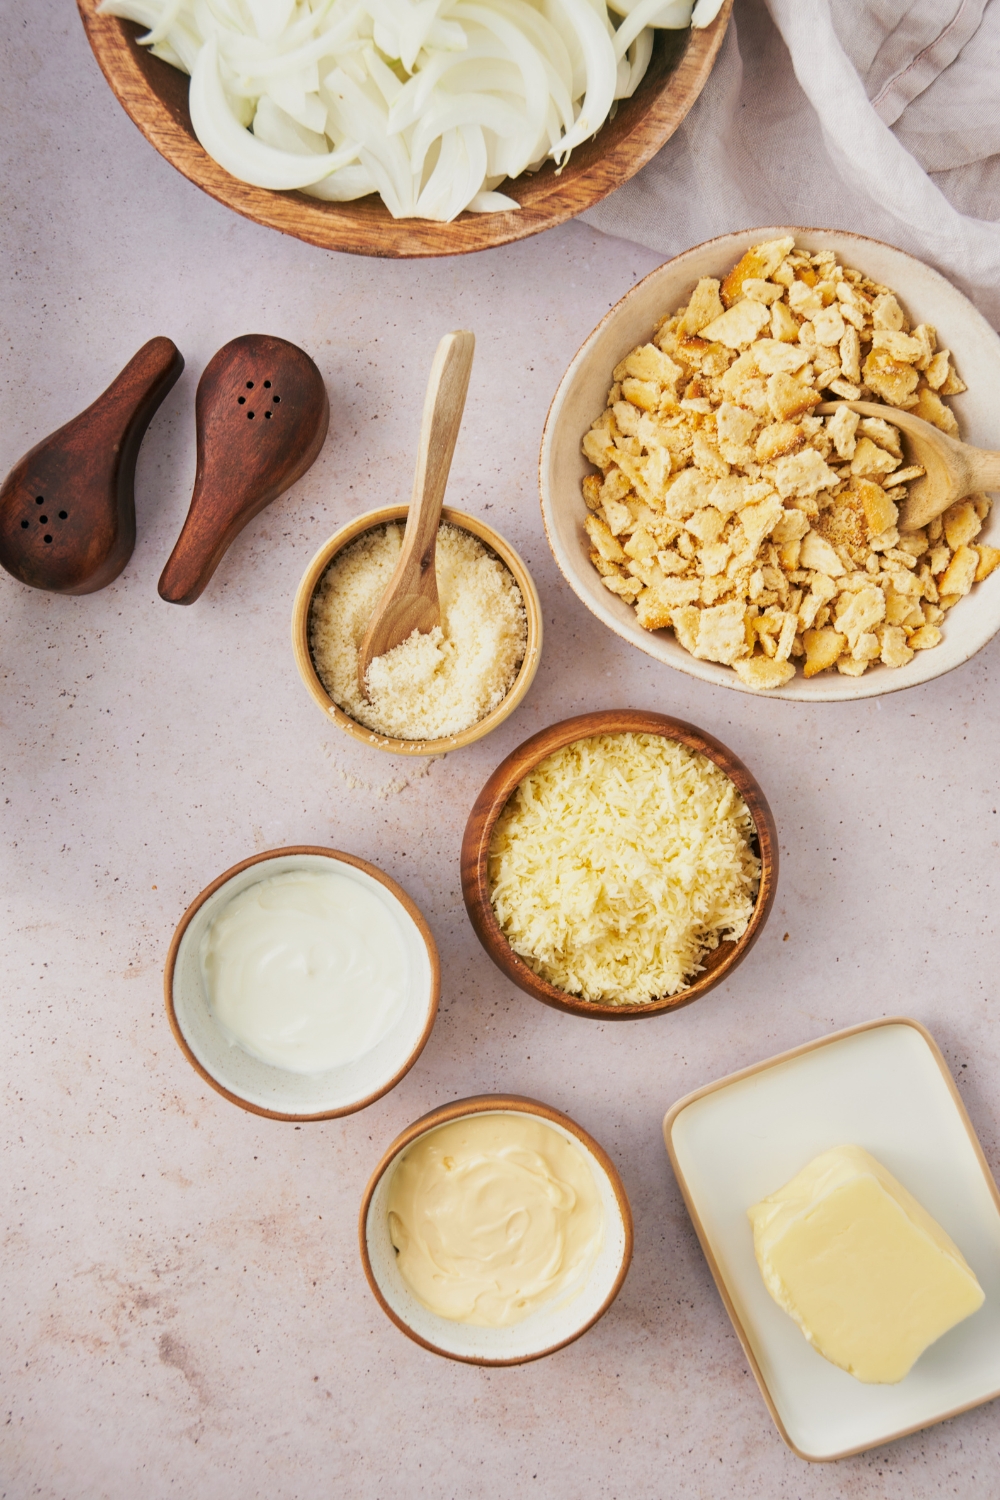 An assortment of ingredients including bowls of cracker crumbs, shredded cheese, mayonnaise, sour cream, butter, and sliced onions.